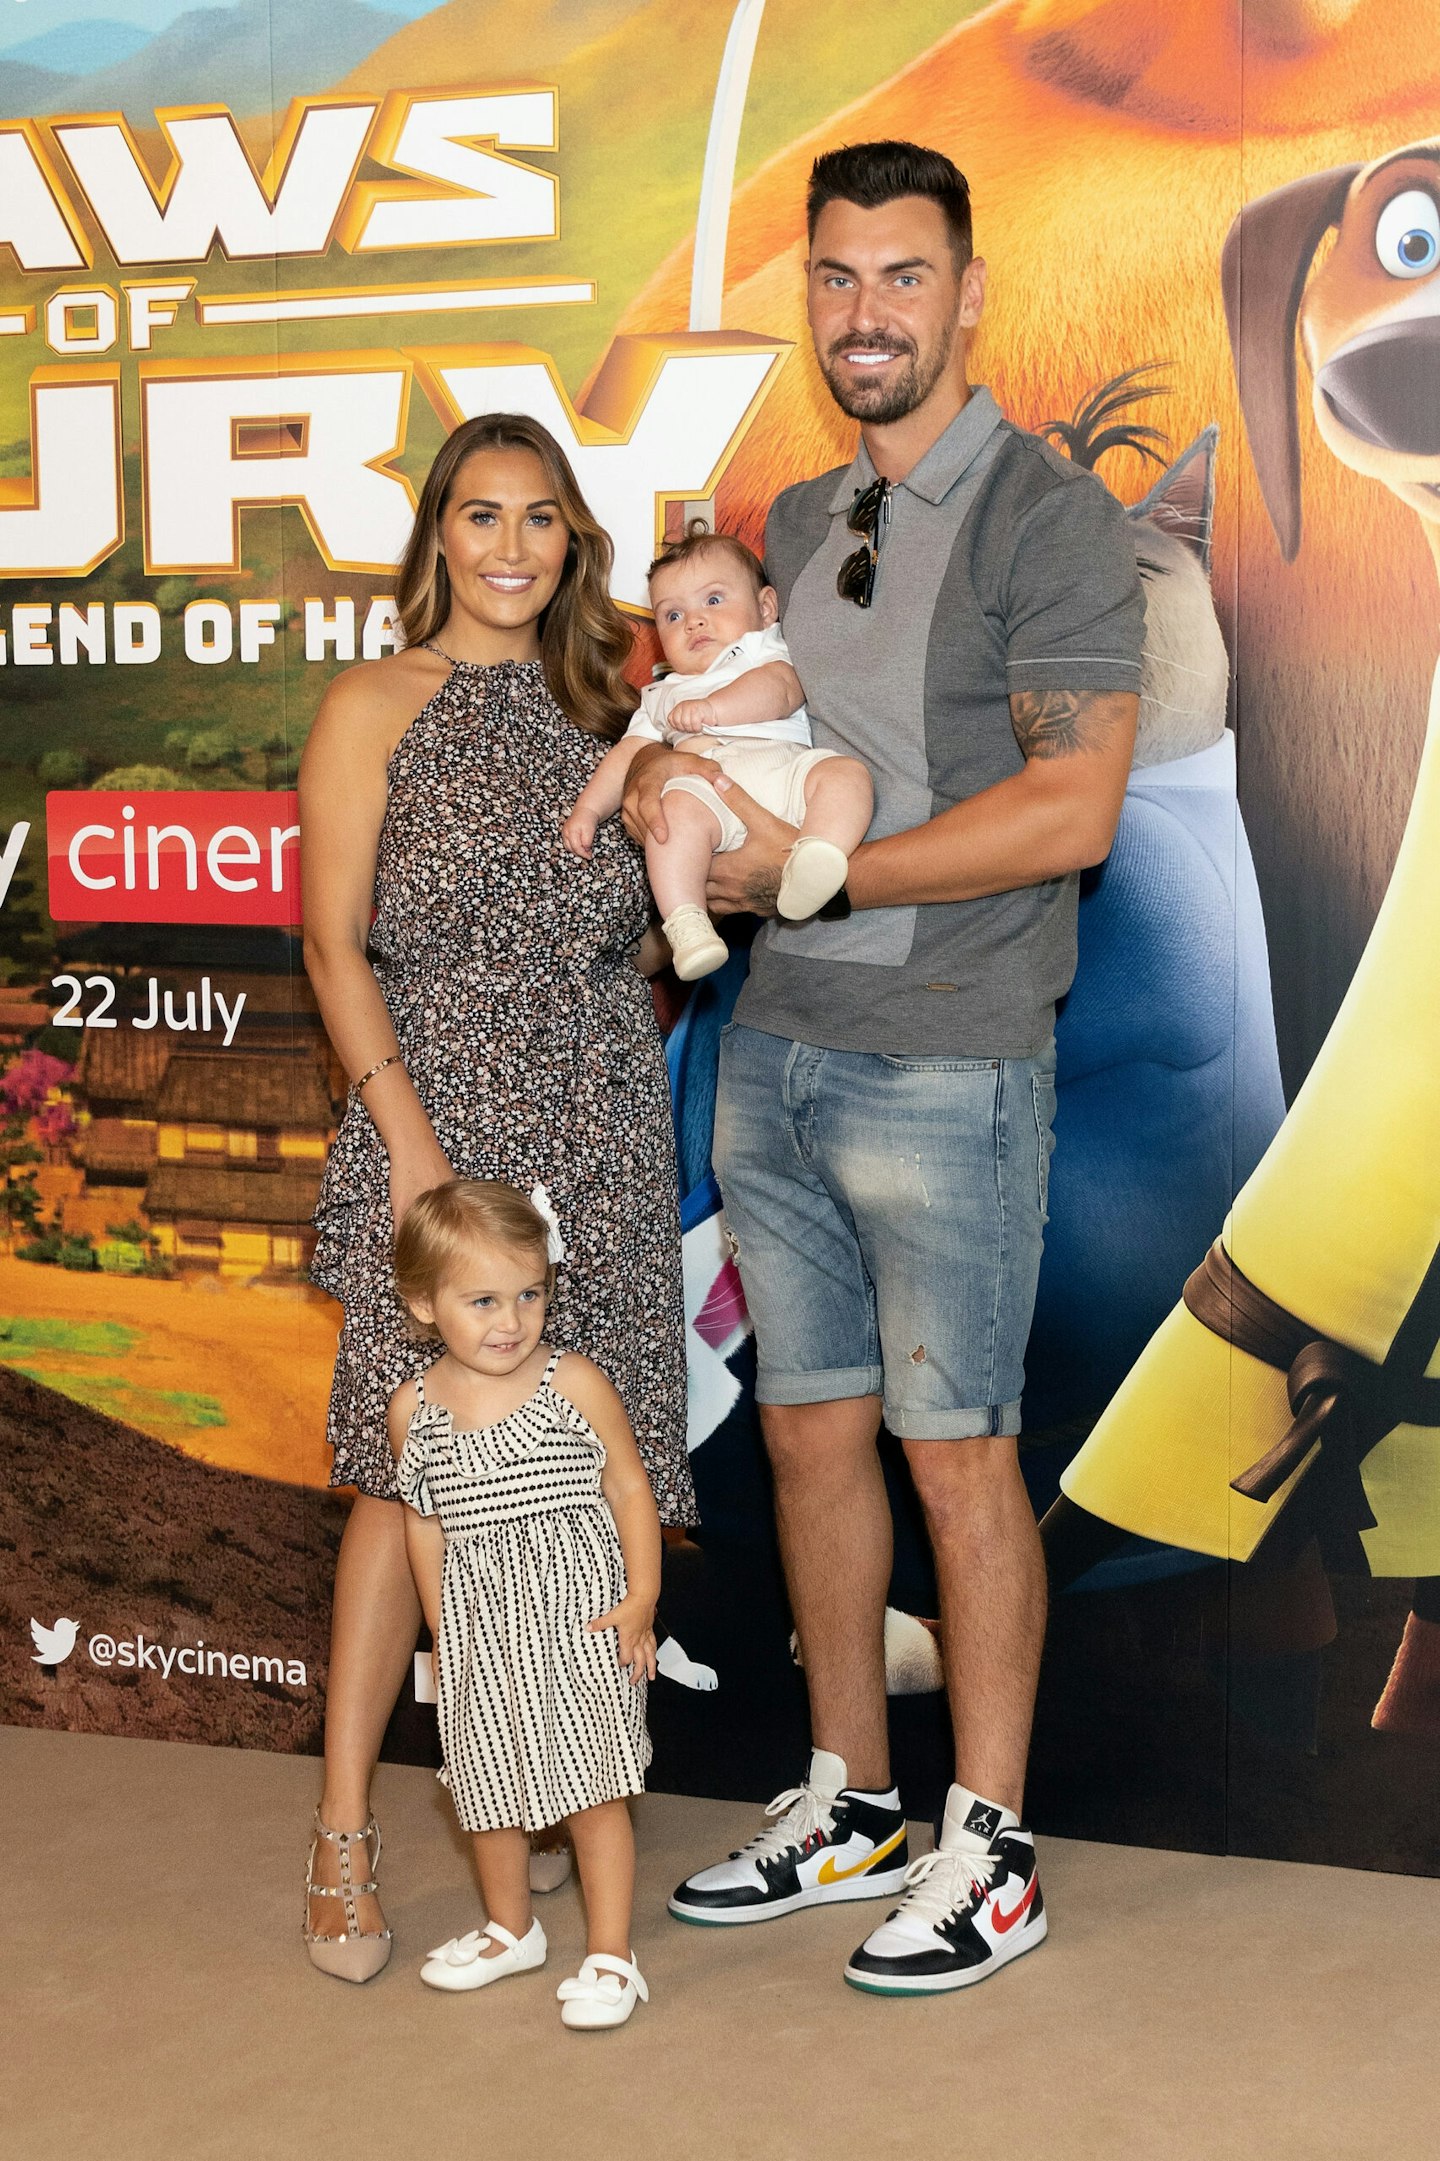 Chloe Goodman and Grant Hall and family